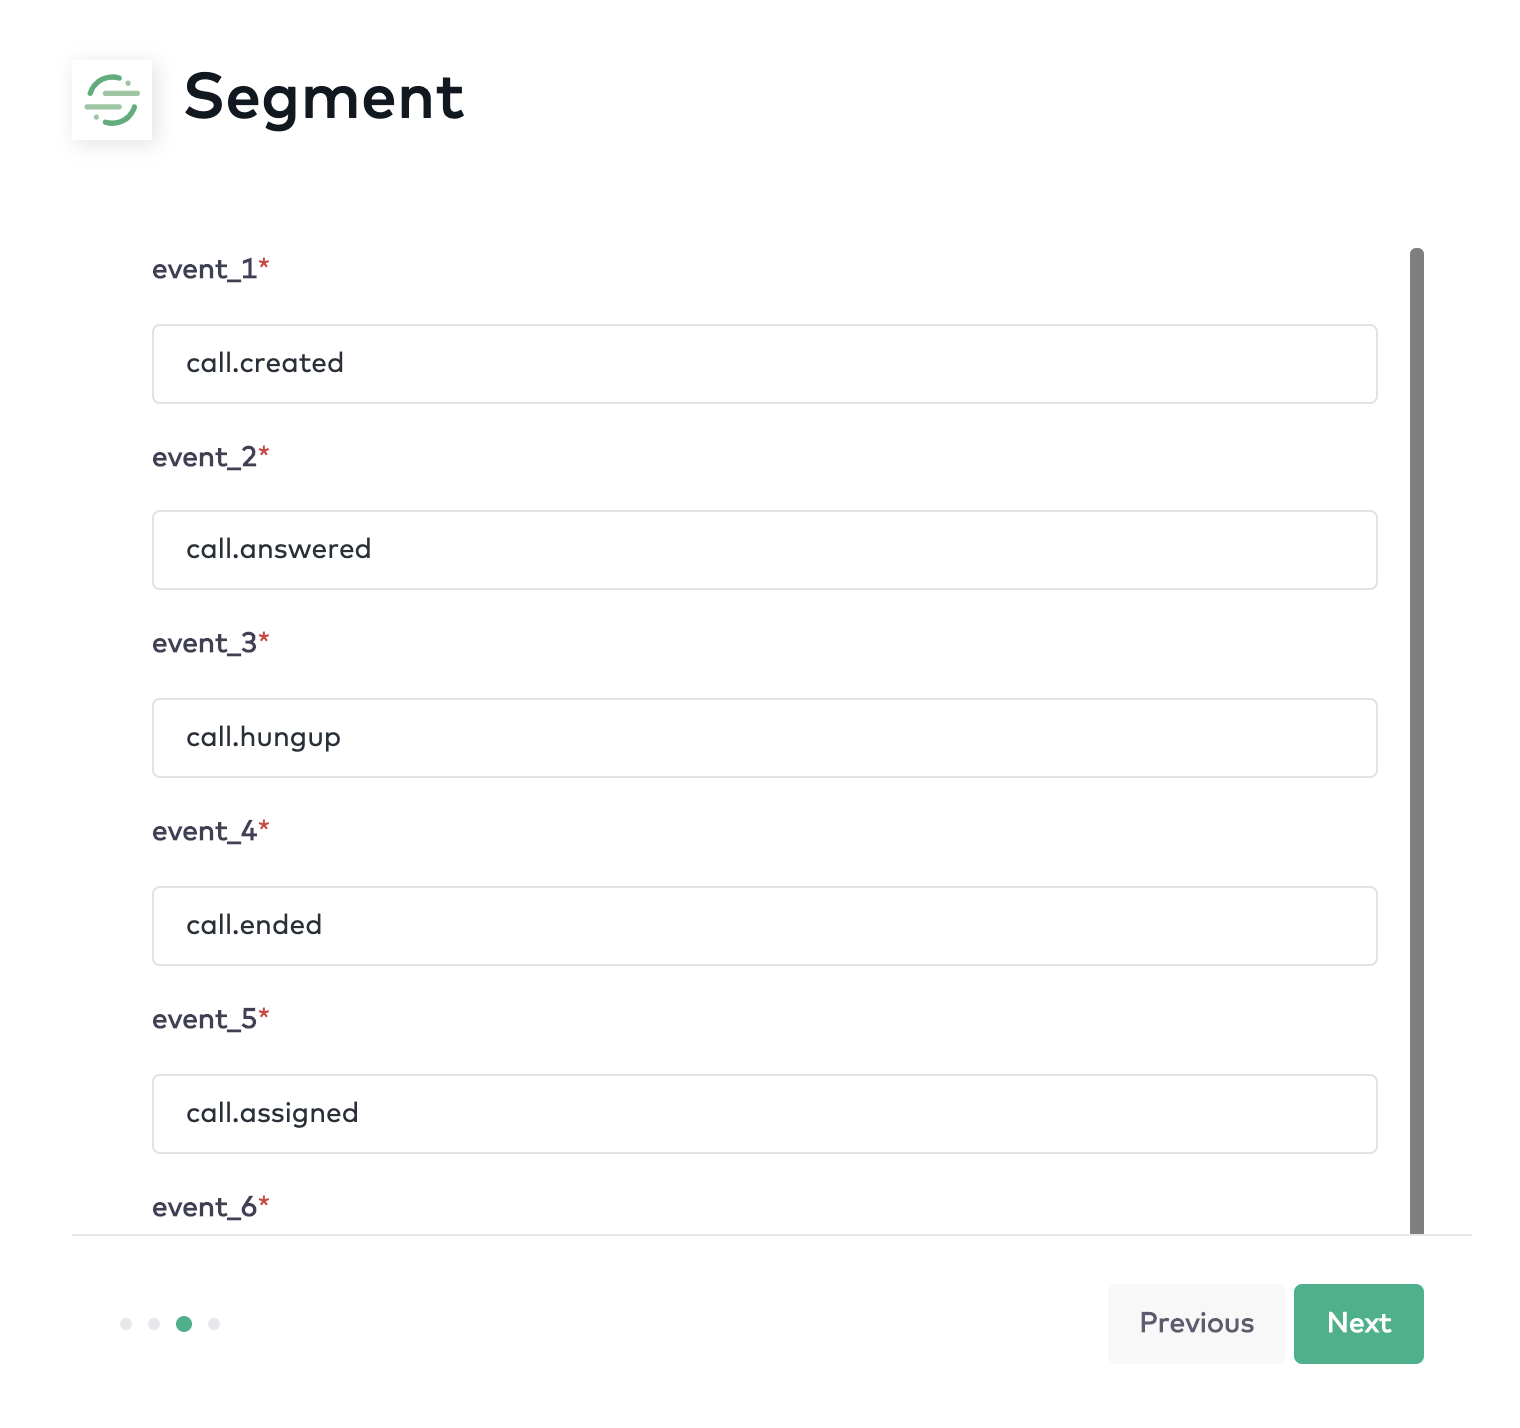 Screenshot of the Segment menu in Aircall with Segment event names entered in all of the event fields.